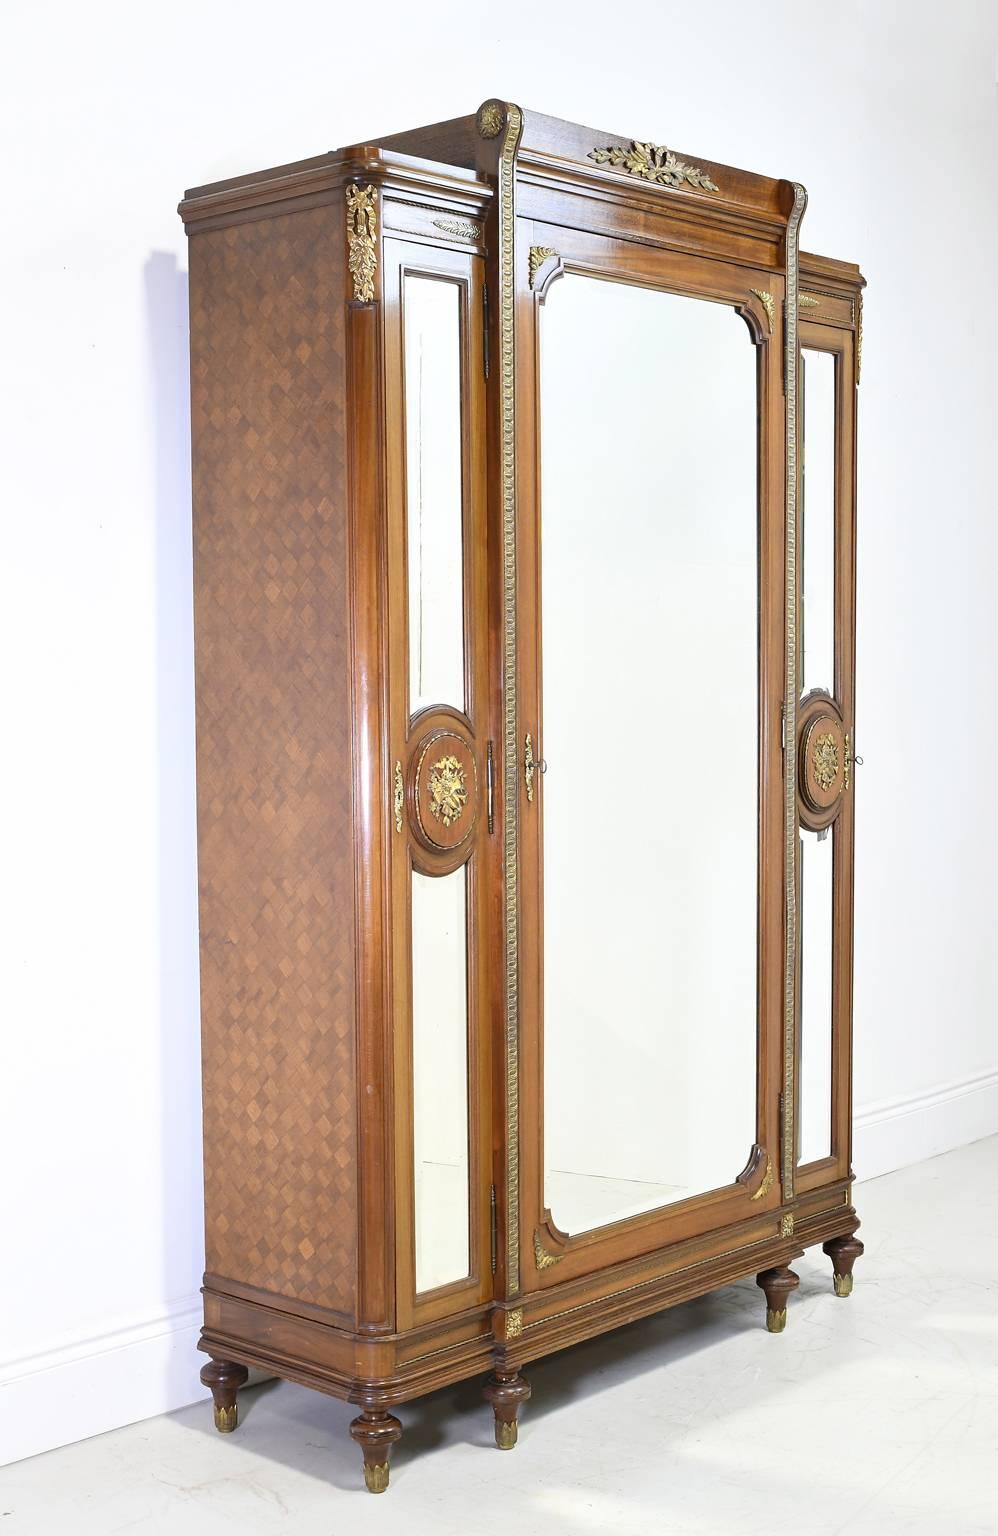 A very fine Napoleon III French armoire in the style of Louis XVI in walnut with bronze dore/ gilt ormolu mounts that include ribbons, sheet music and various musical instruments. Other details include parquetry sides, a stepped bonnet, three